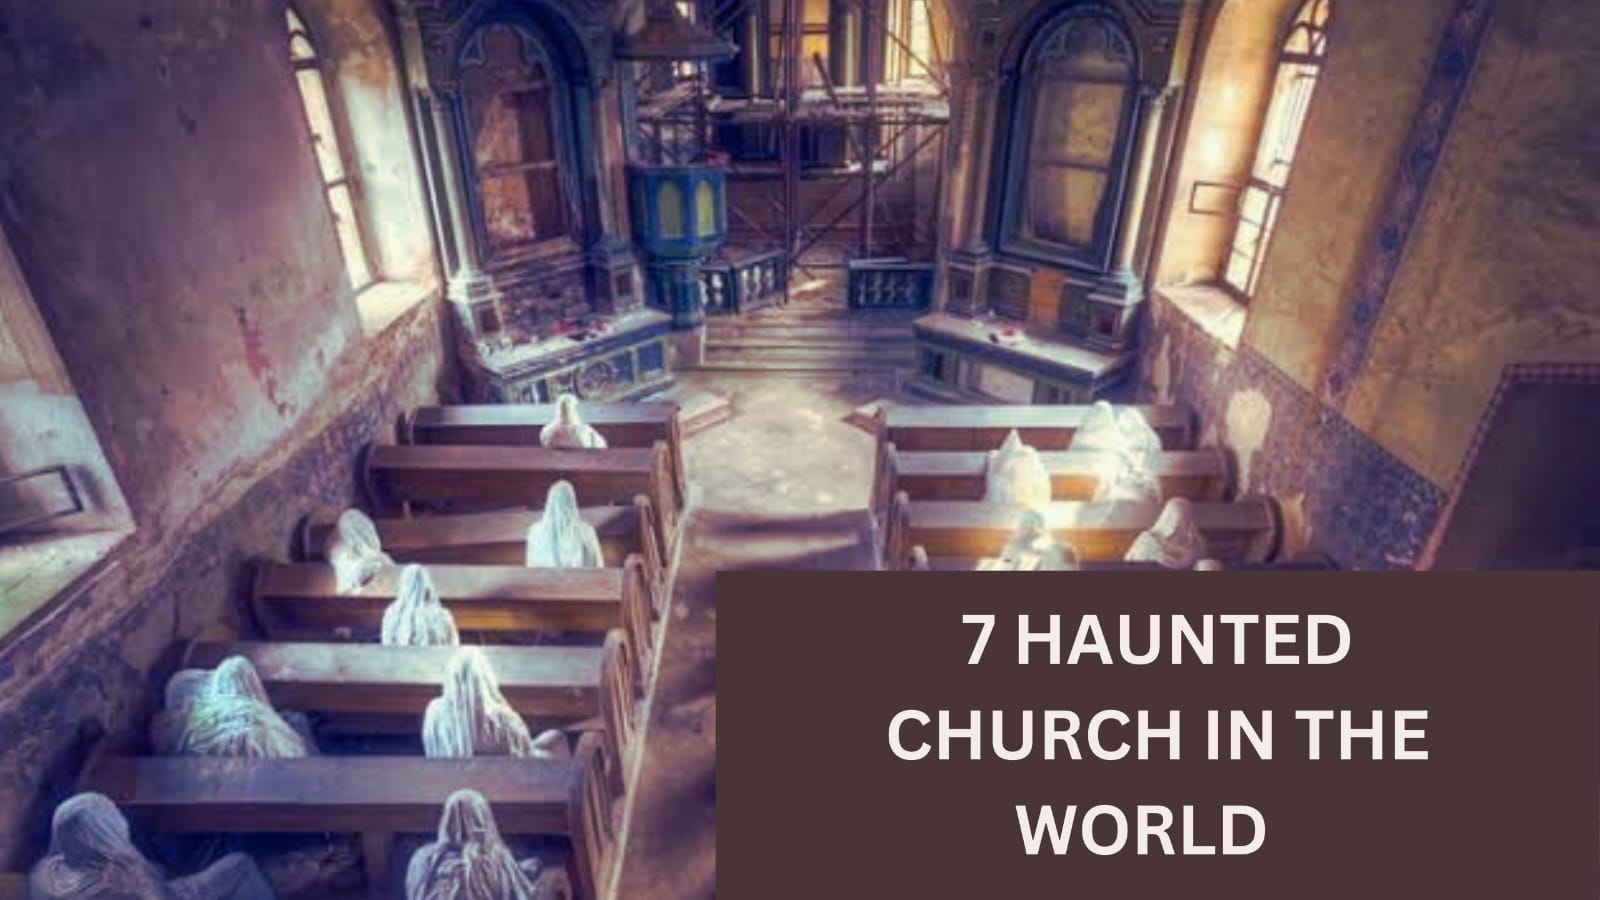 7 HAUNTED CHURCH IN THE WORLD